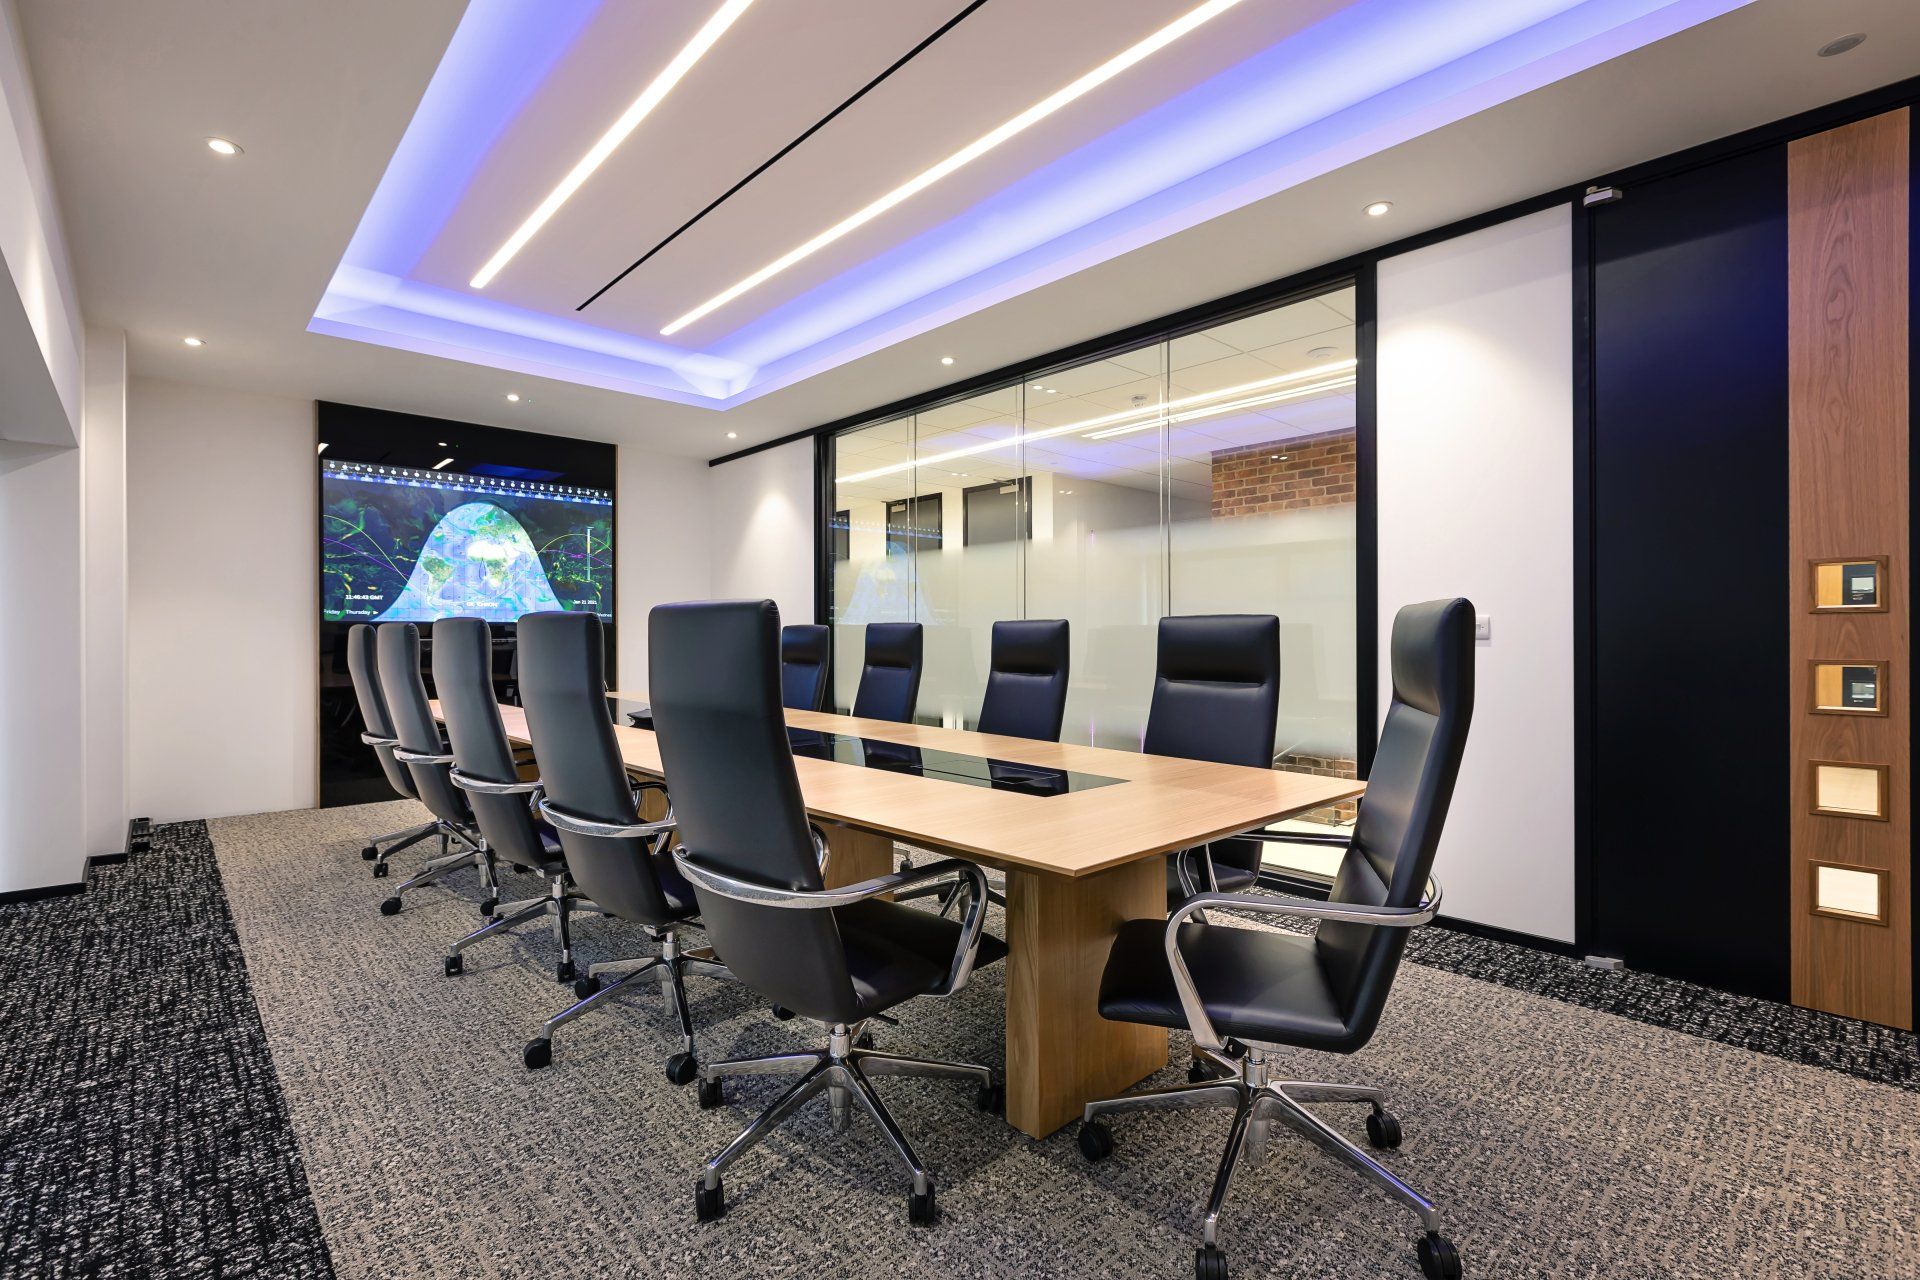 Boardrooms and meeting rooms| Glenside Commercial Interiors